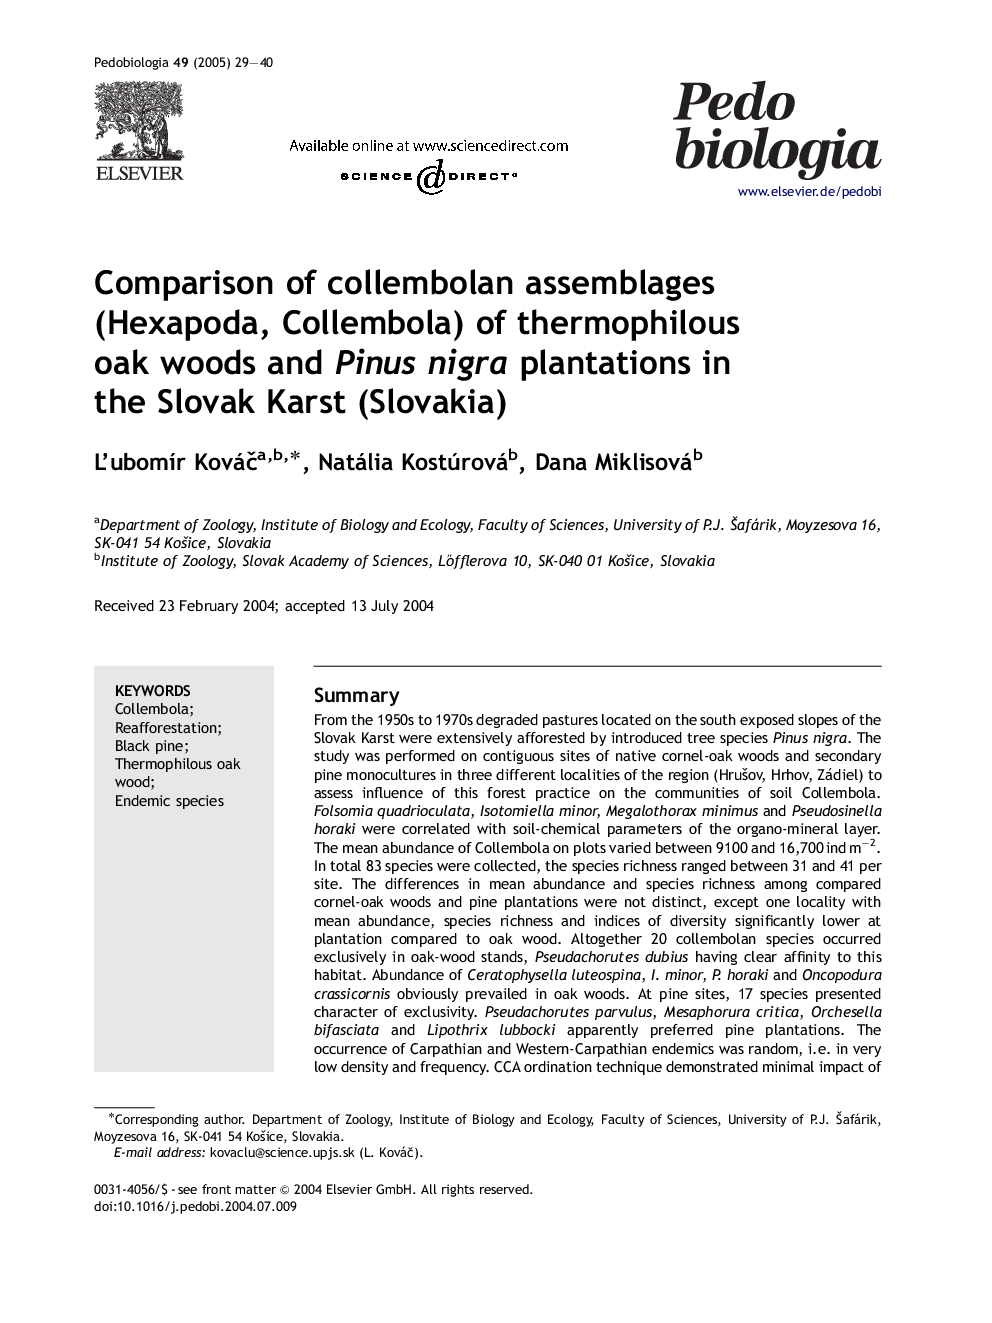 Comparison of collembolan assemblages (Hexapoda, Collembola) of thermophilous oak woods and Pinus nigra plantations in the Slovak Karst (Slovakia)